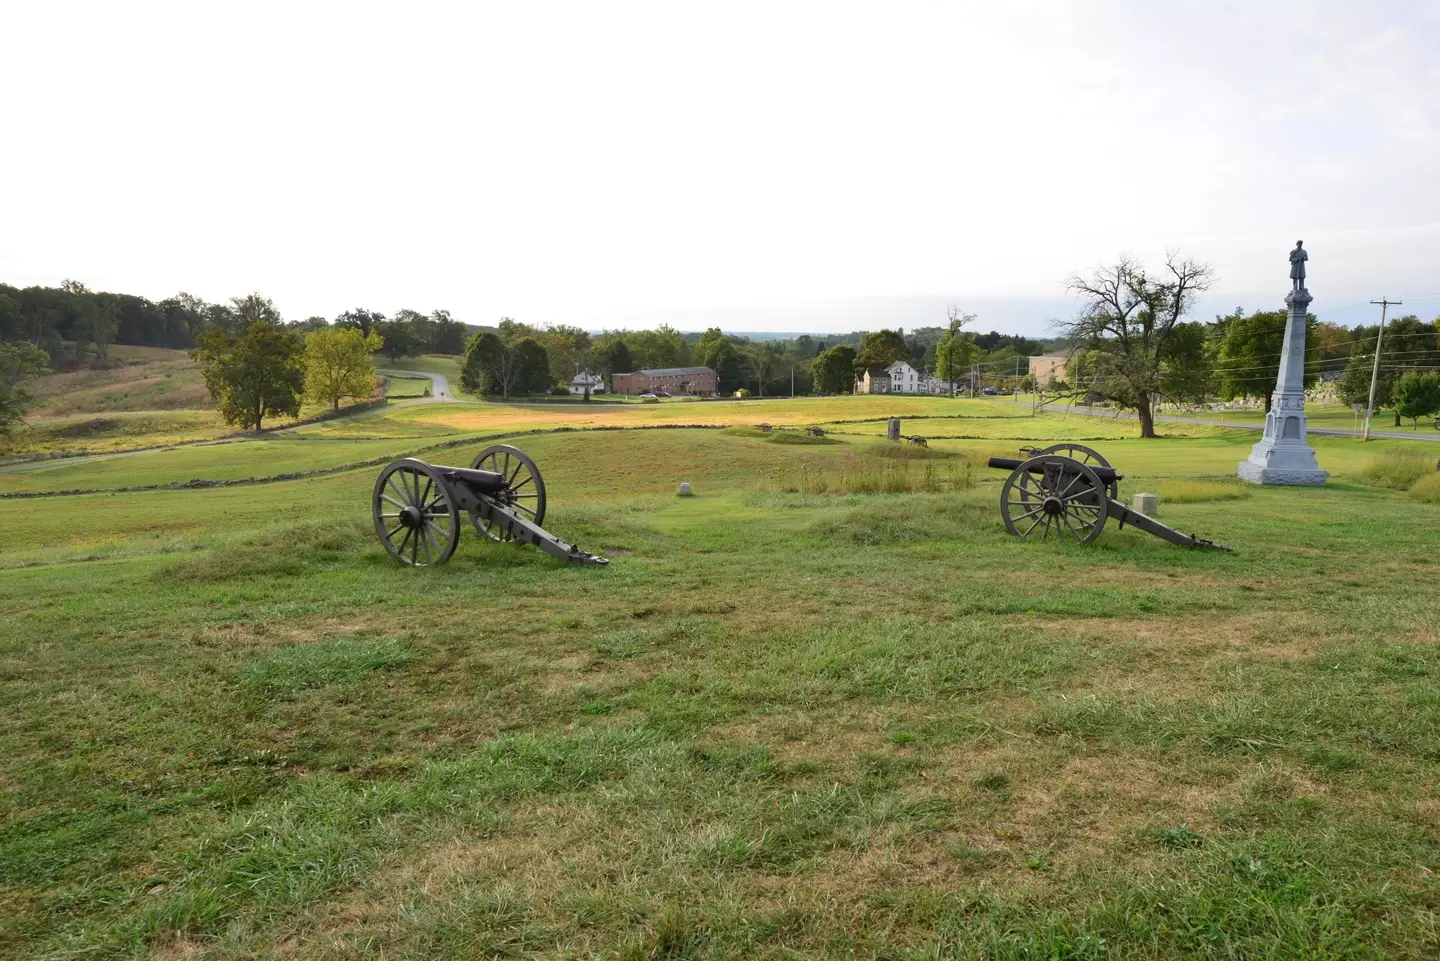 Cemetery Hill in Gettysburg, where the battle took place.